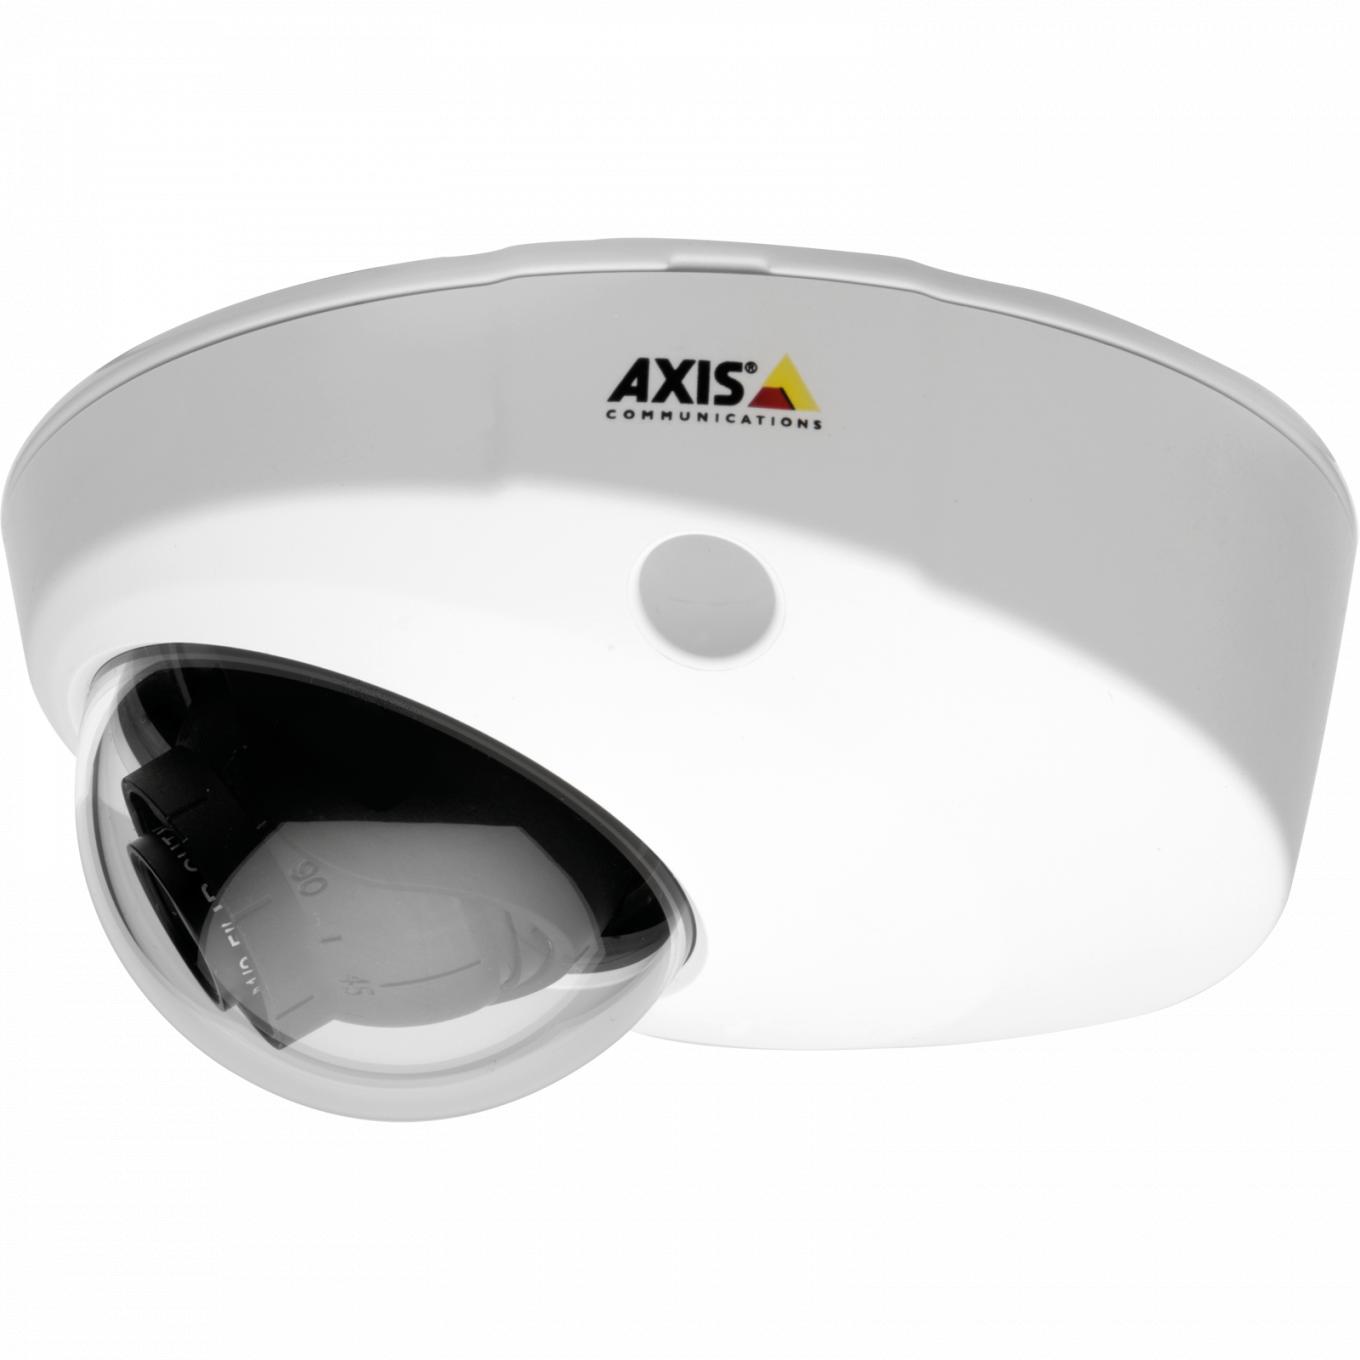 AXIS P3904-R Mk II IP Camera has WDR and Lightfinder. The product is viewed from its left profile.